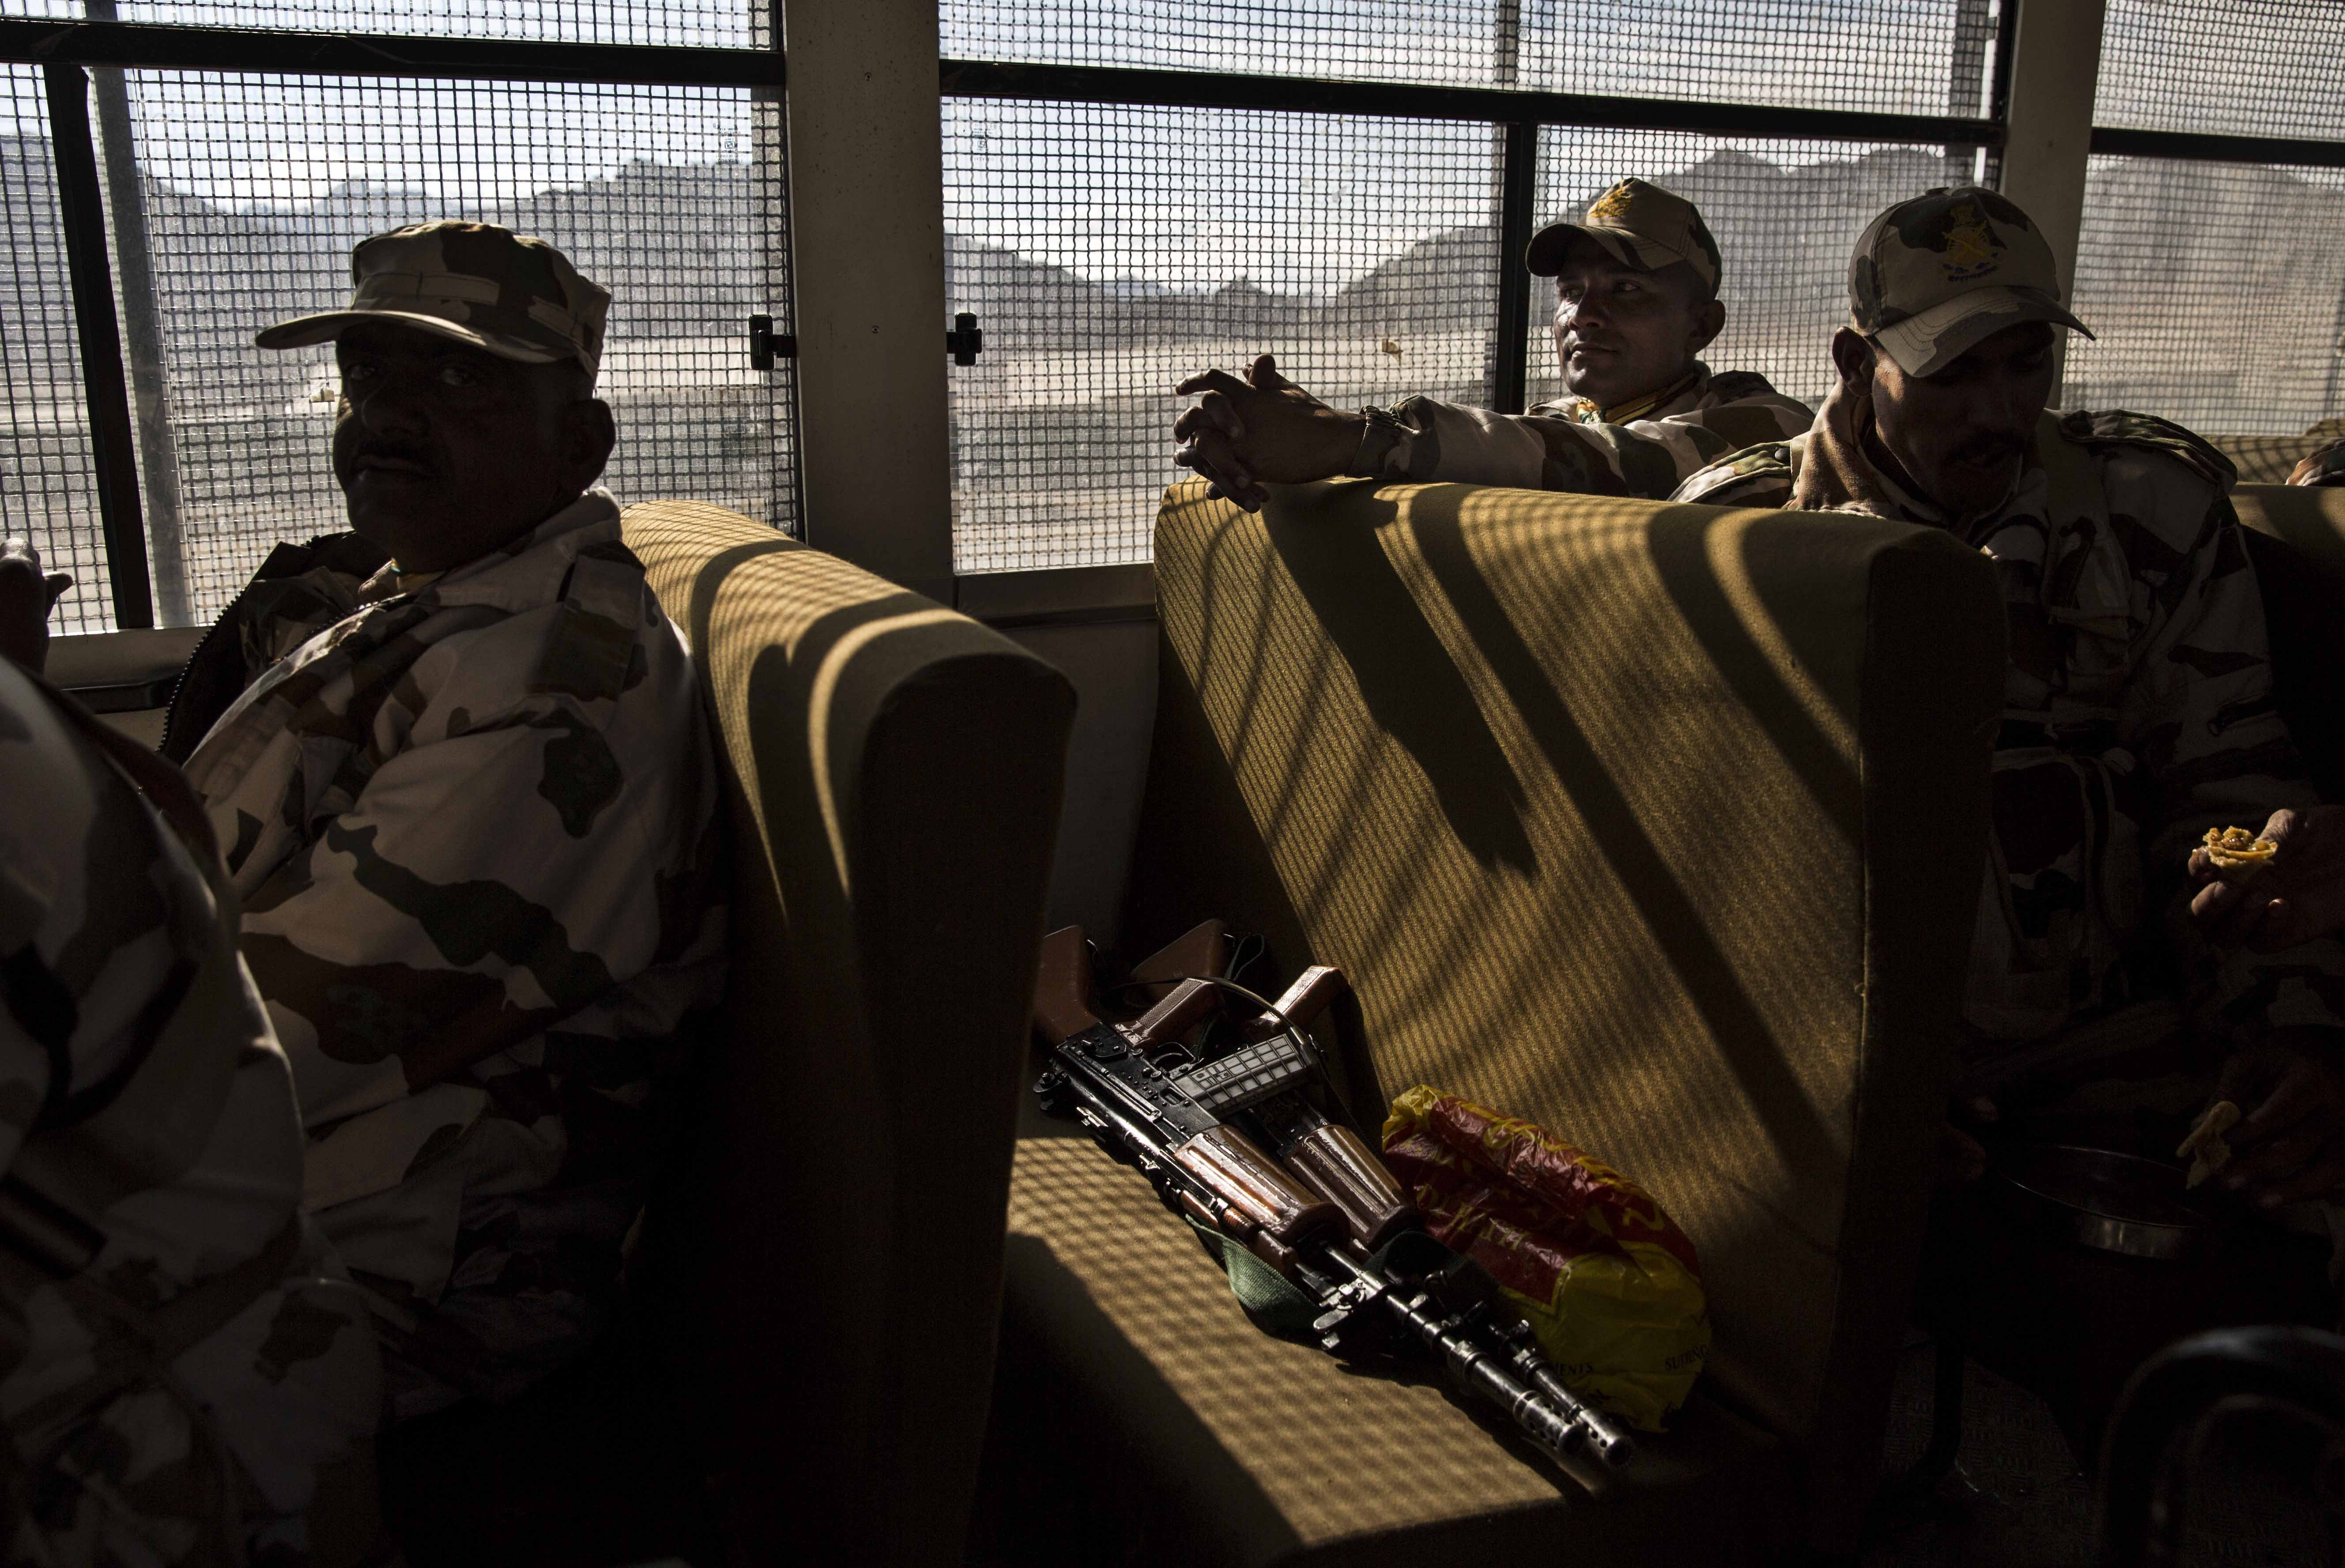 Security force soldiers on election duty sit in a bus as they leave a central collection point to head for a polling station, on May 6, 2014 in Leh, Ladakh.